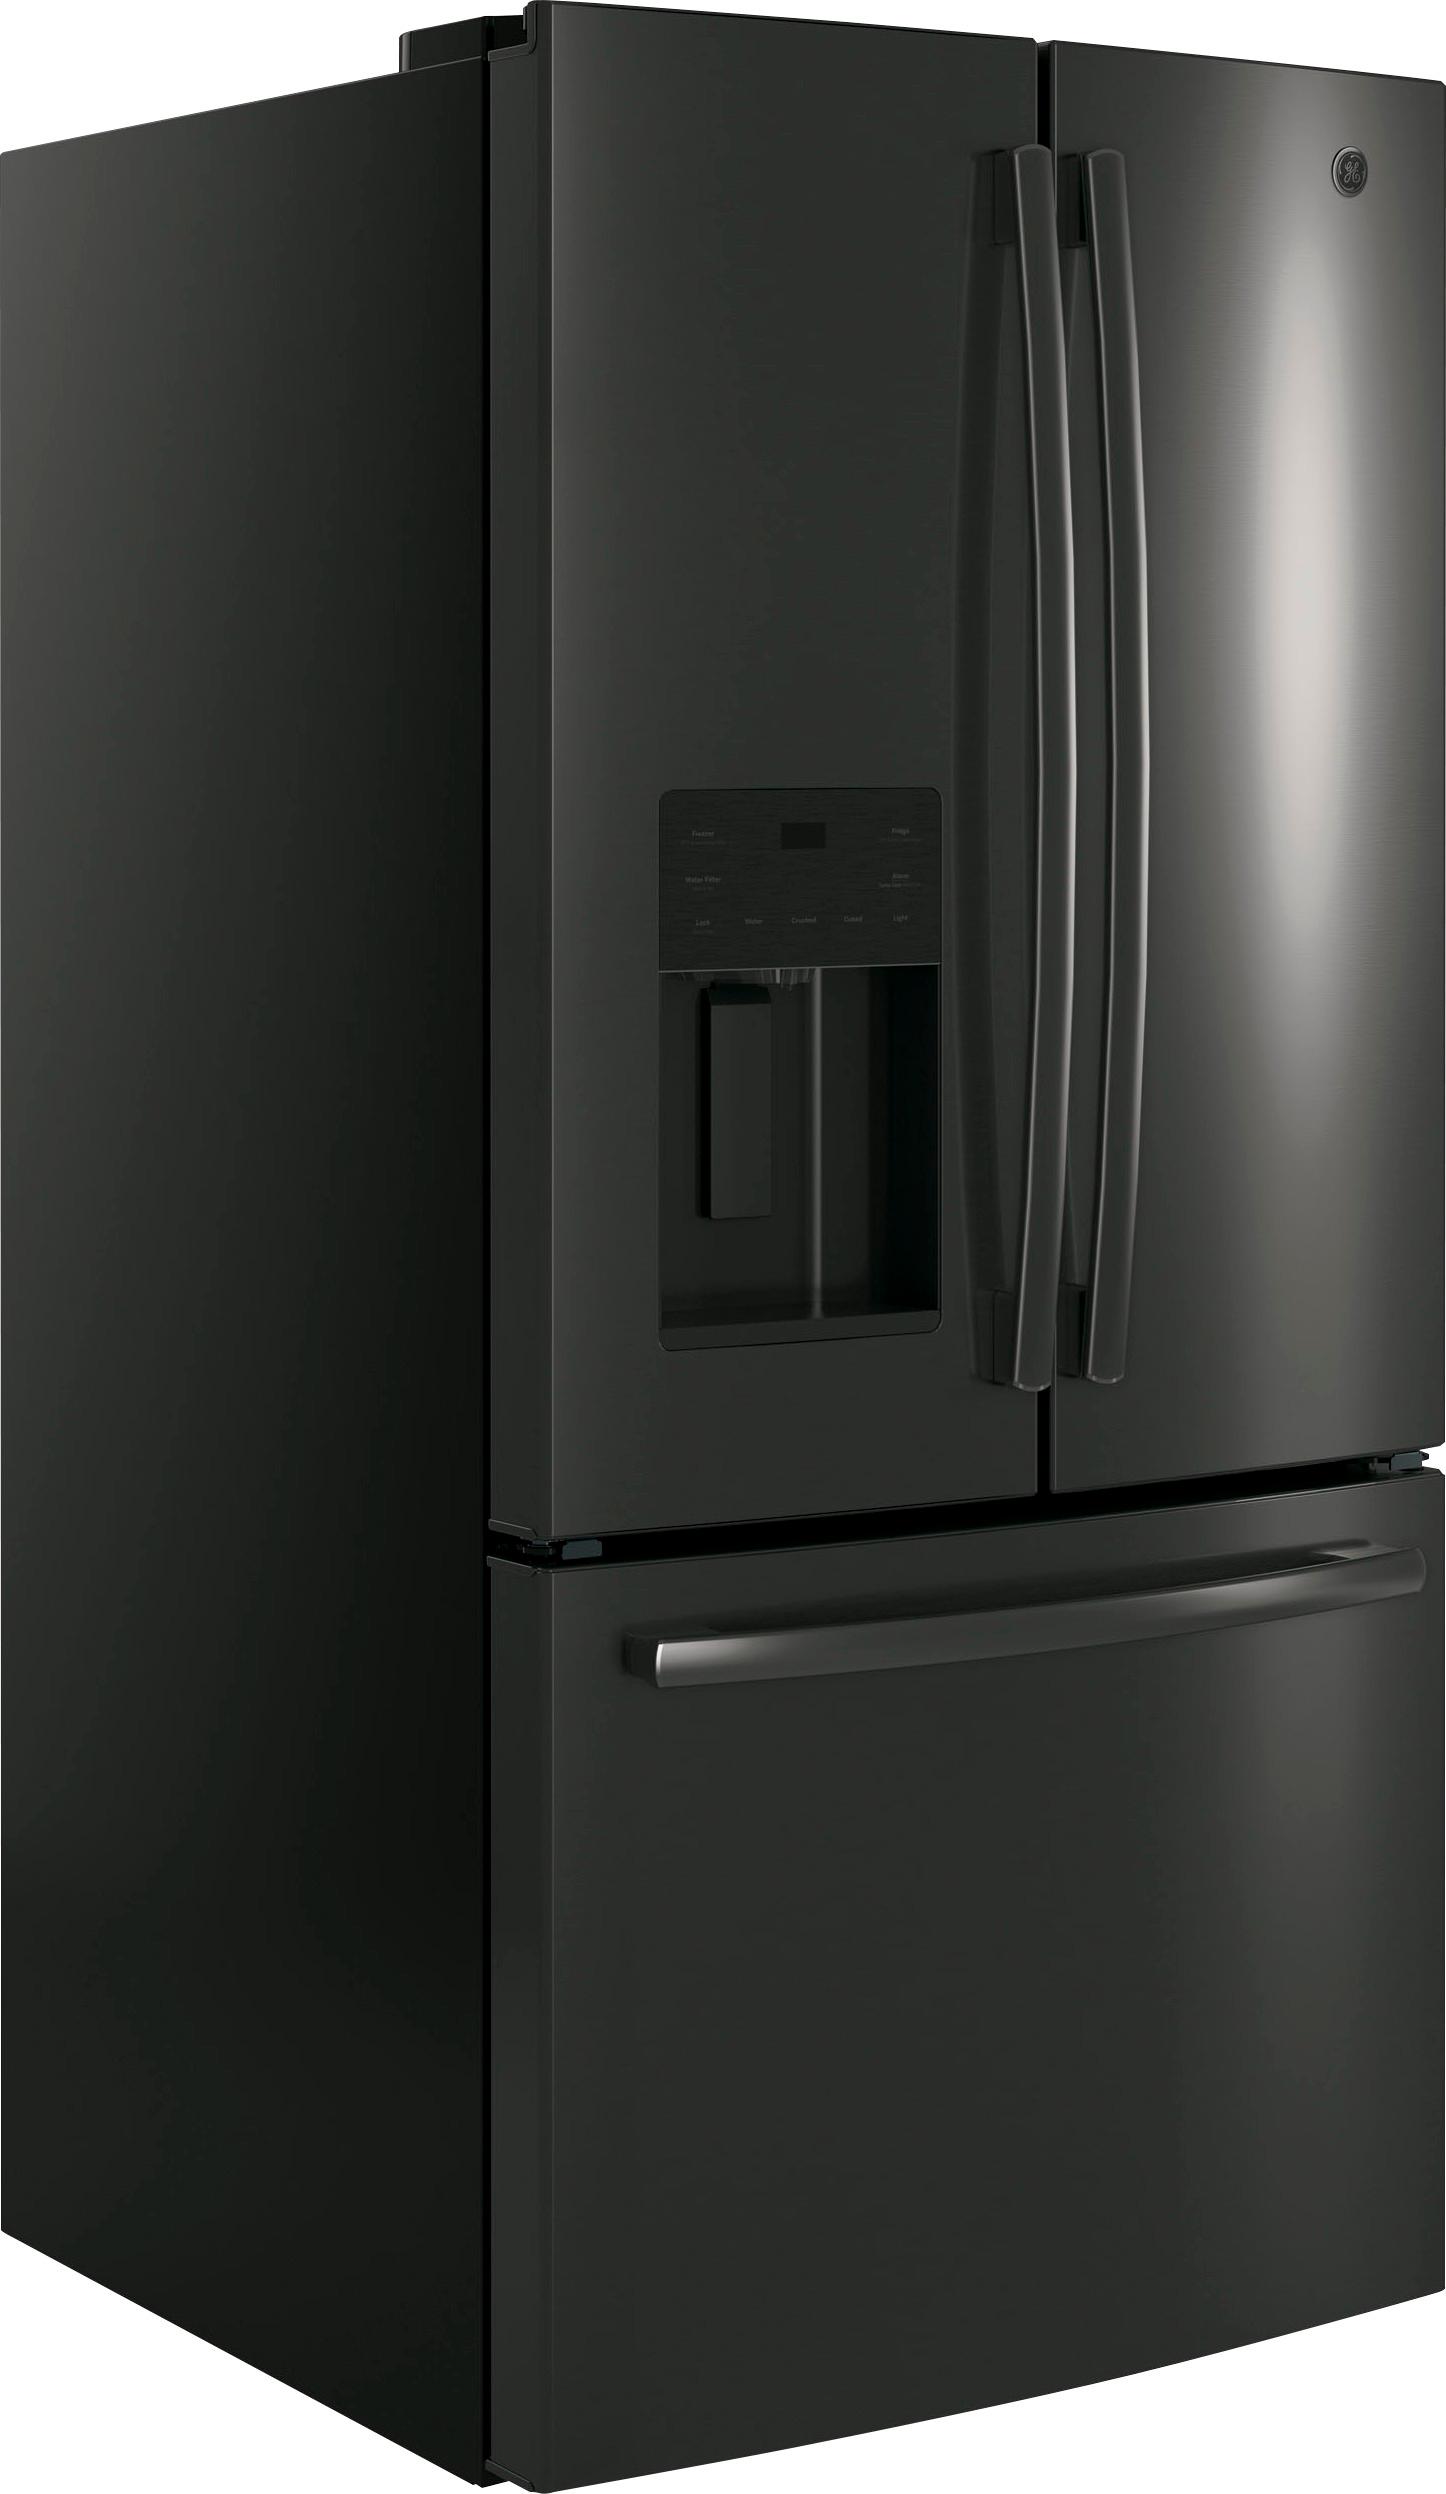 Angle View: GE - 23.6 Cu. Ft. French Door Refrigerator - Black stainless steel